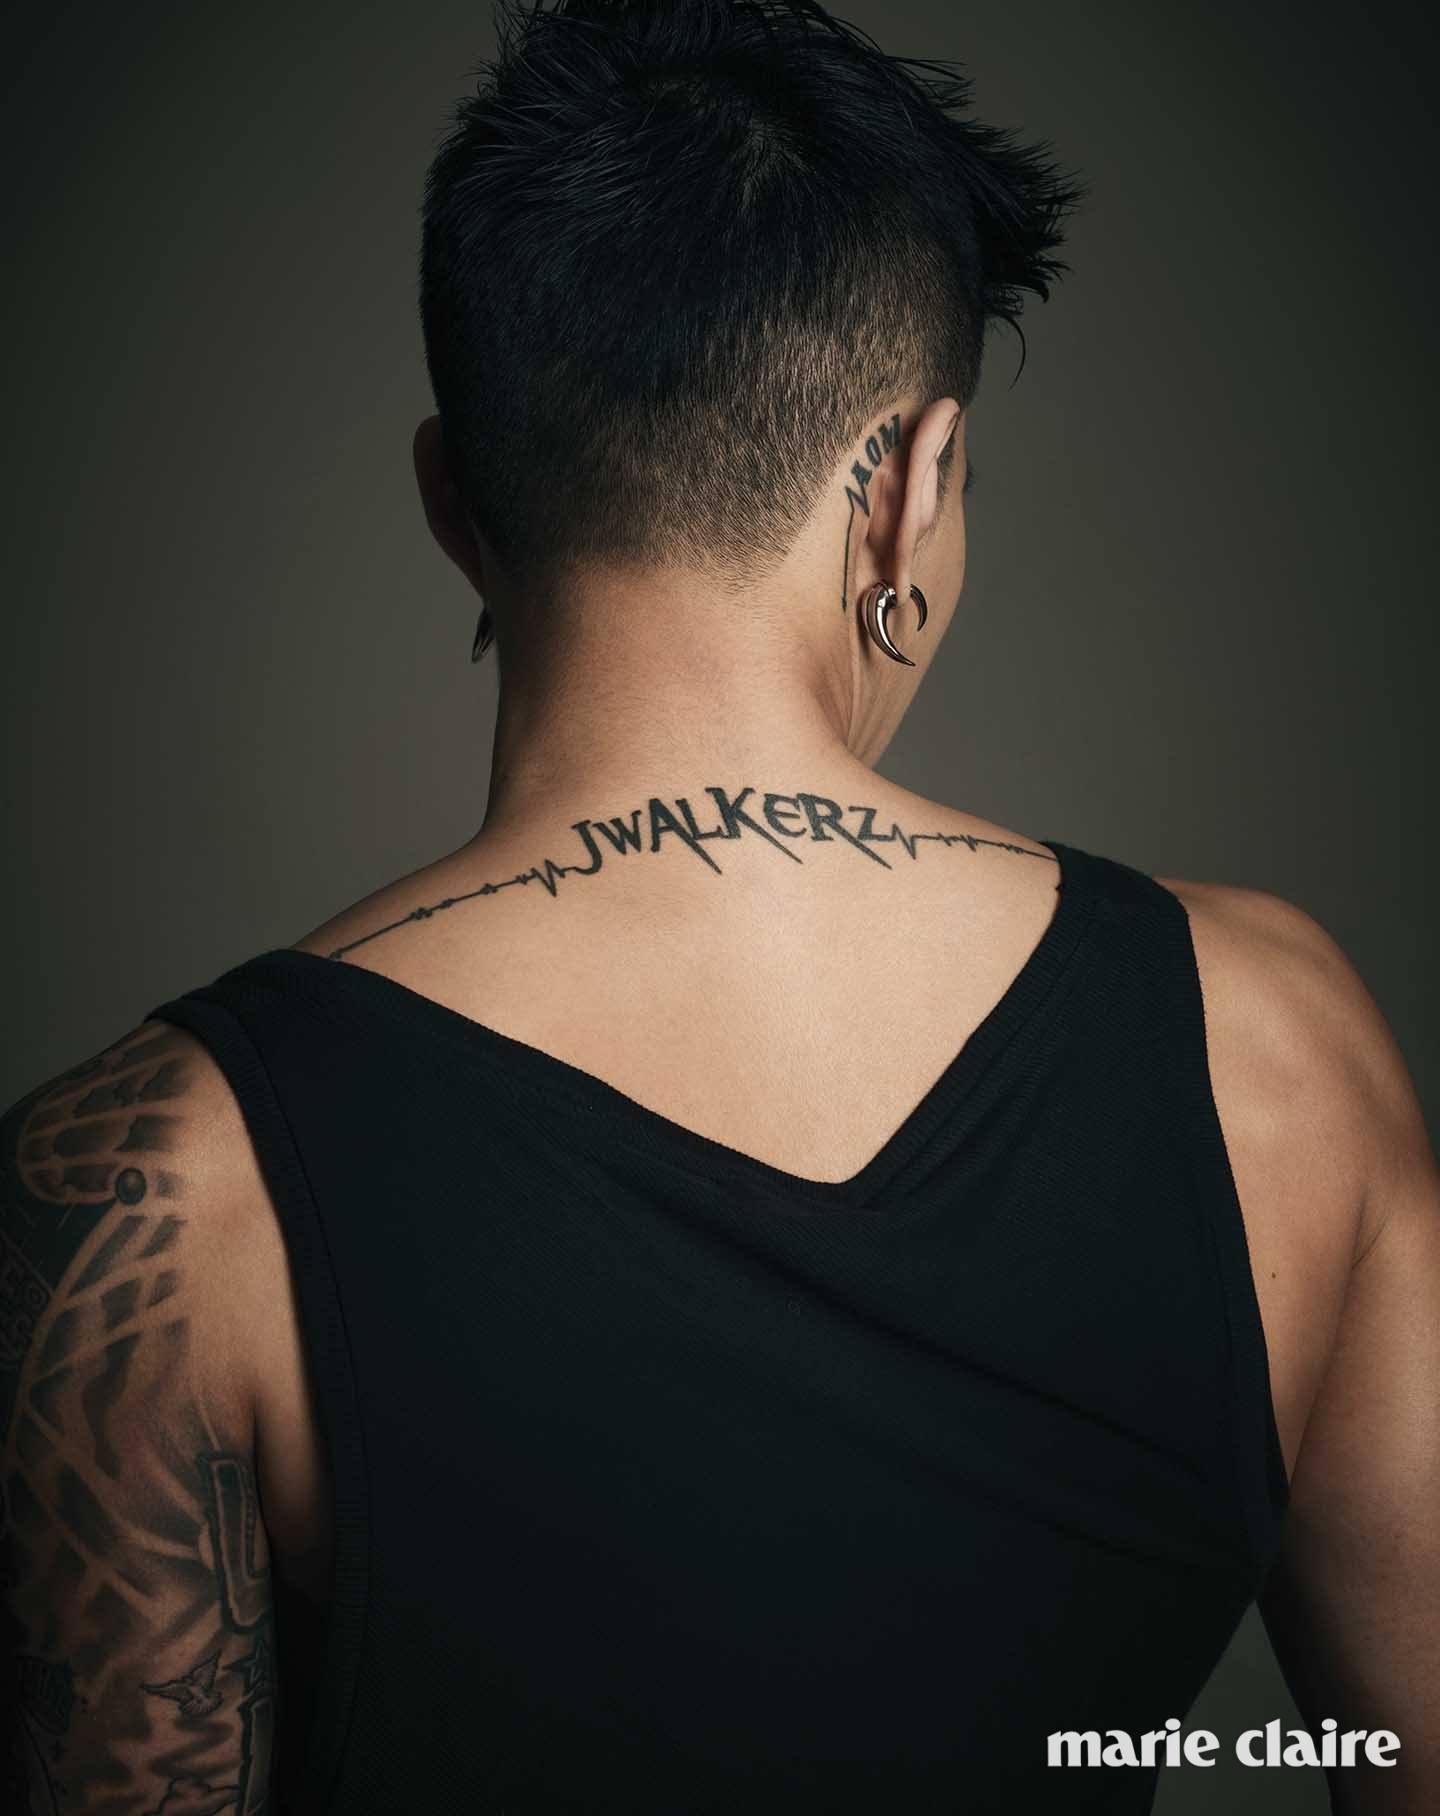 Jay Park Explains His Tattoos  Rappers Ink  All Def Music  YouTube